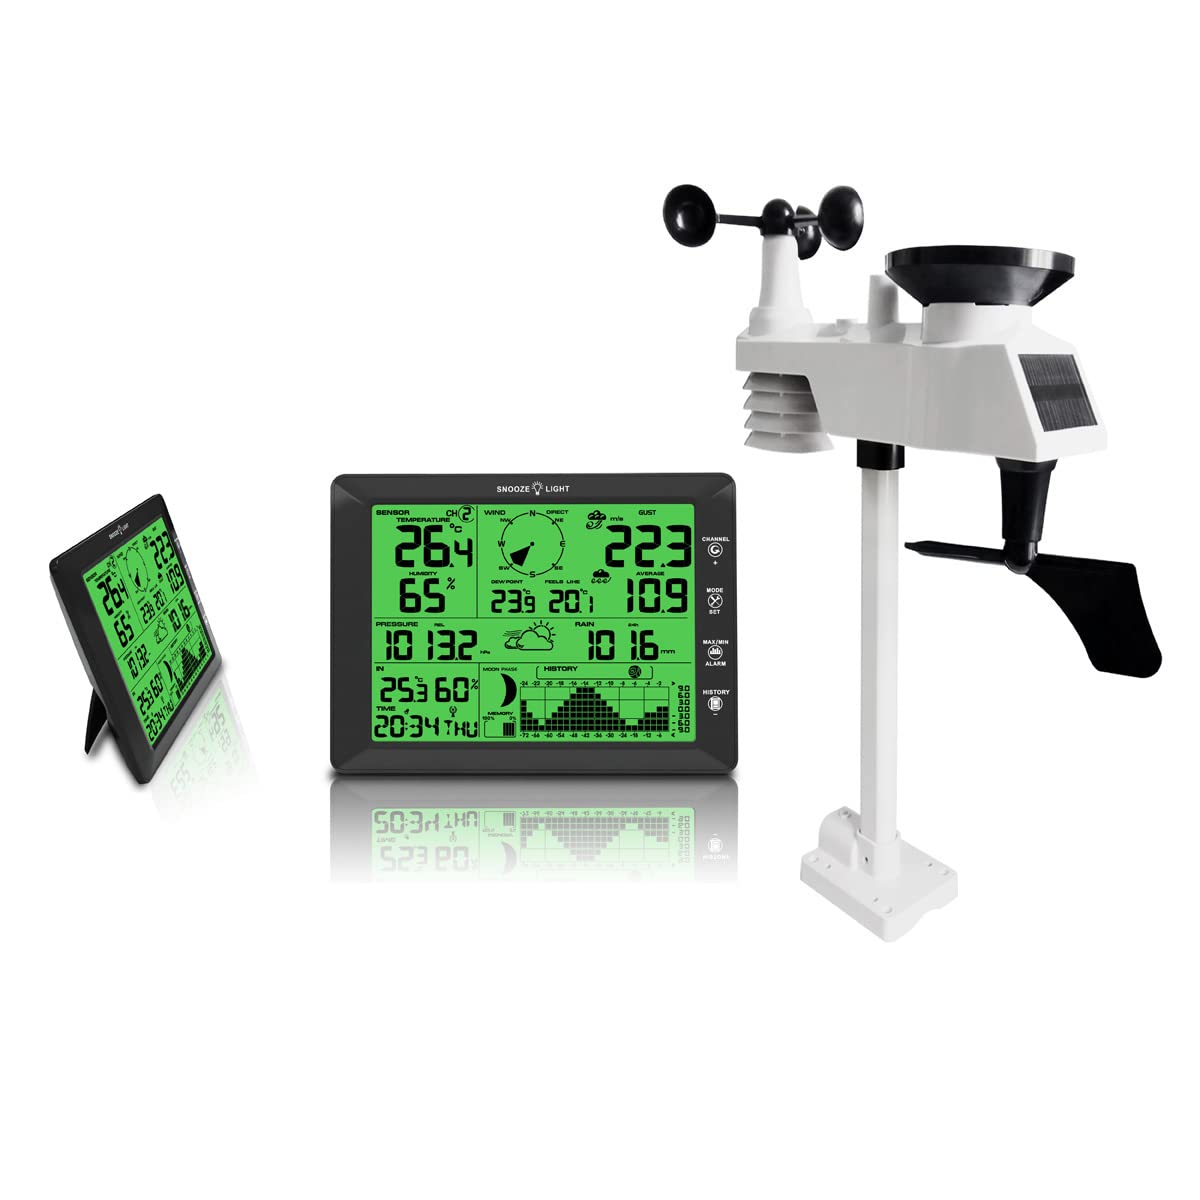 Acurite 01535M Iris (5-in-1) Weather Station with HD Display, White Black